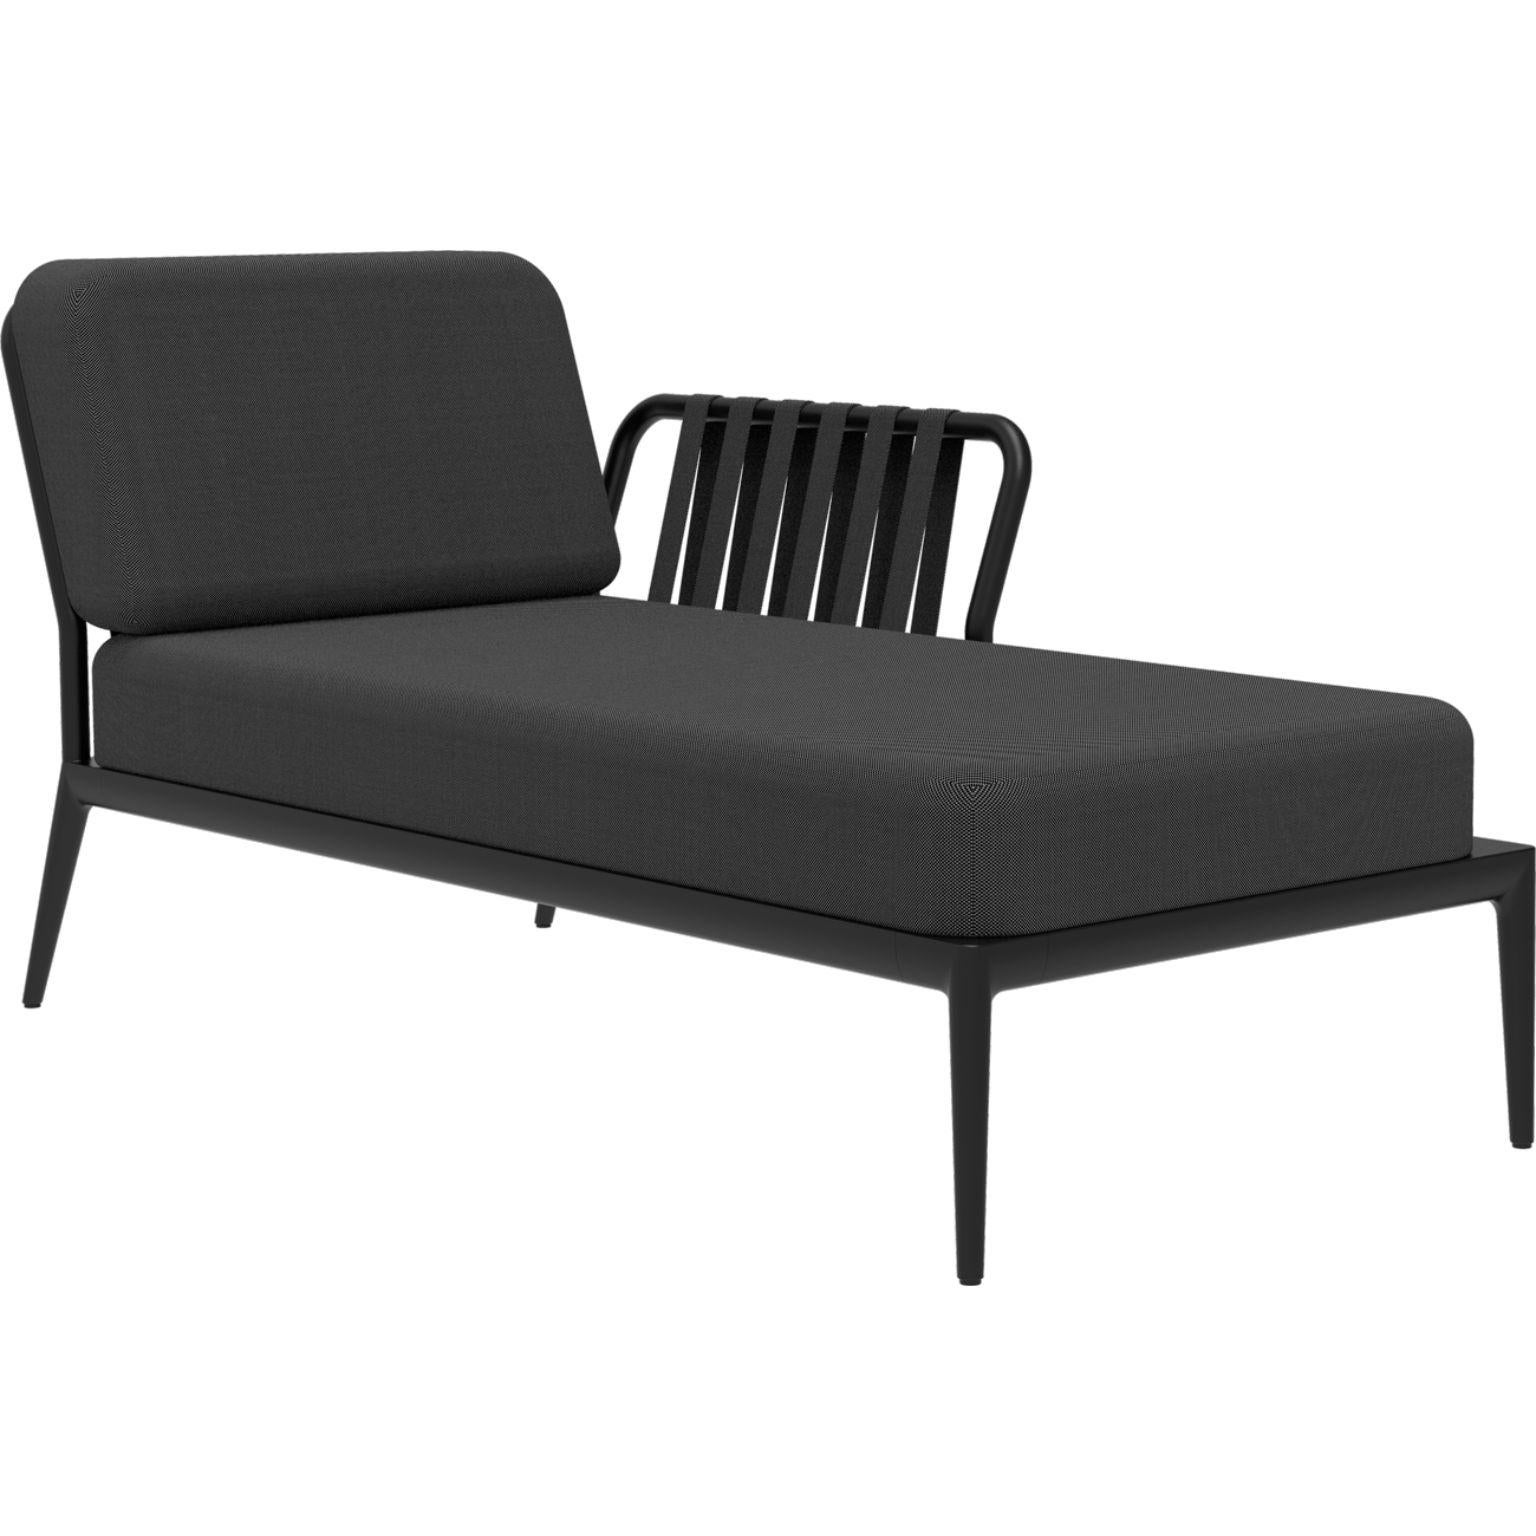 Ribbons Black Left Chaise Longue by MOWEE
Dimensions: D80 x W155 x H81 cm
Material: Aluminum, Upholstery
Weight: 28 kg
Also Available in different colors and finishes. 

An unmistakable collection for its beauty and robustness. A tribute to